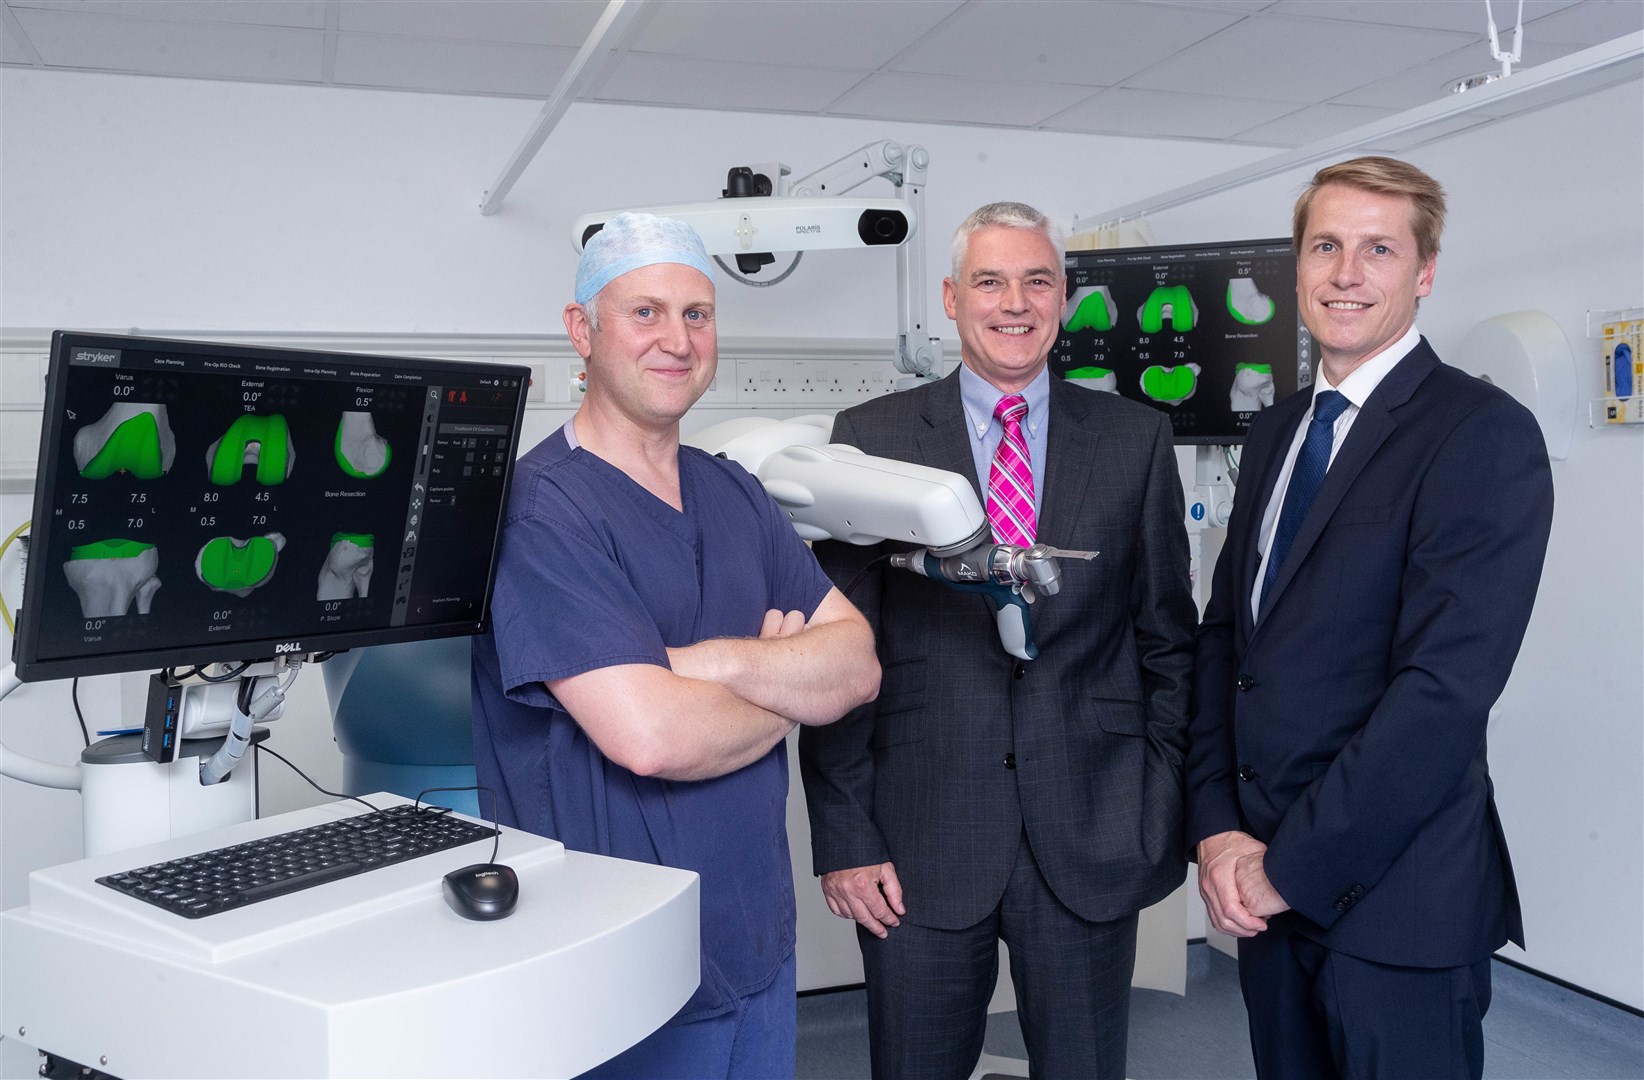 Consultants Steve Hamilton, Robert Duthie and Martin Mitchell with the Stryker Mako robotic arm